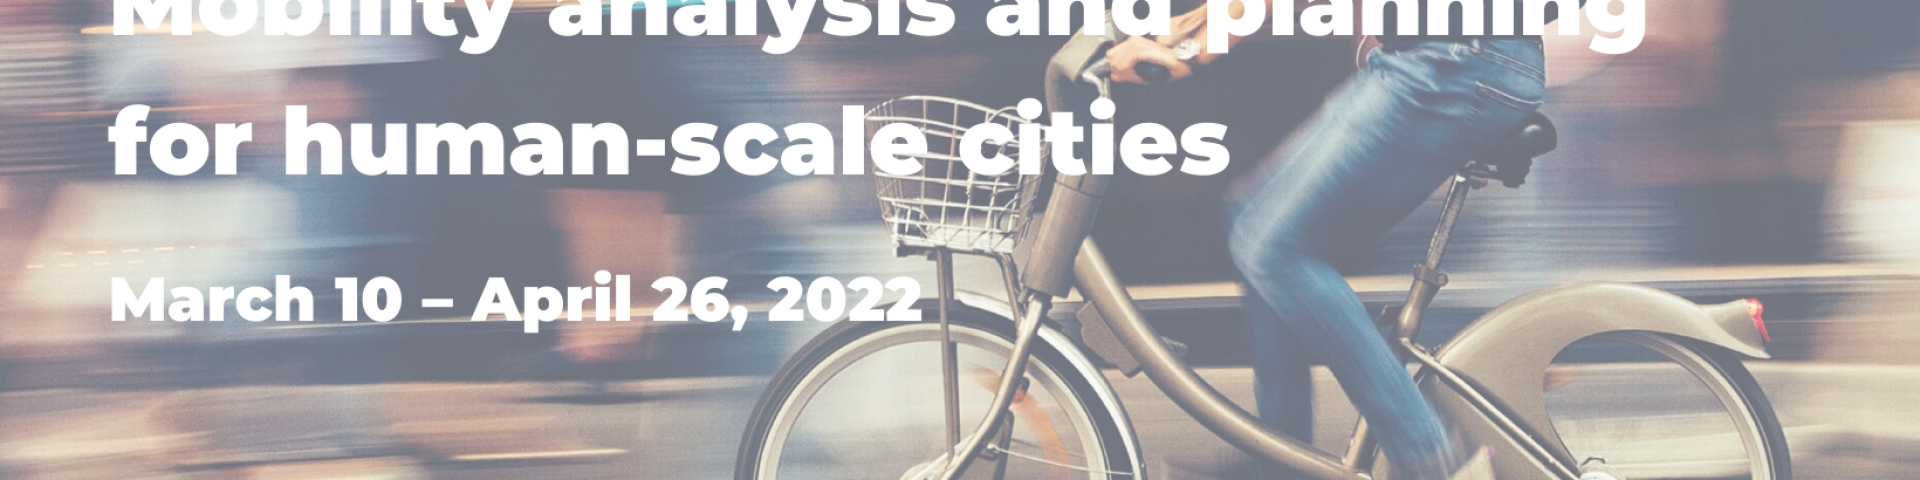 A new public online lecture series “Mobility analysis and planning for human-scale cities”